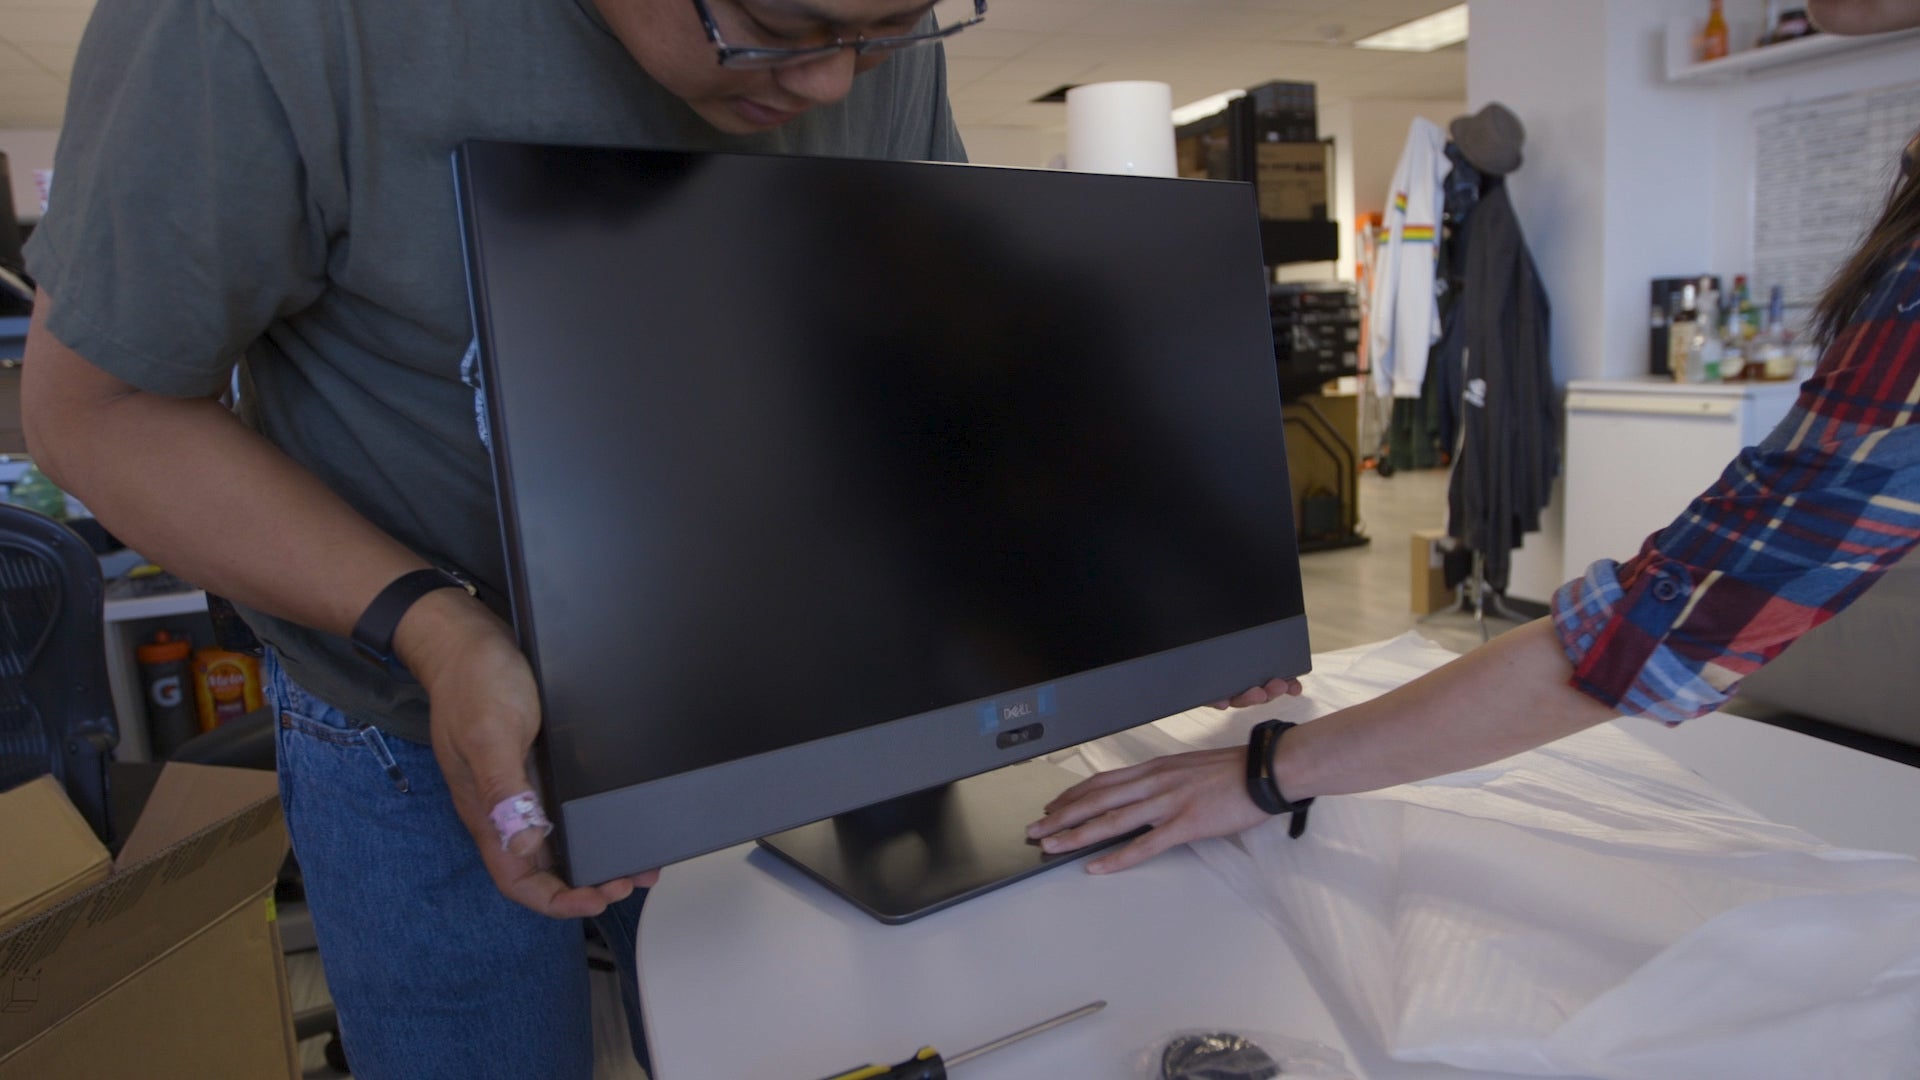 Pour crisis Glare Dell Inspiron 27 7000 All-in-One unboxing (and partial teardown!) | IDG.TV